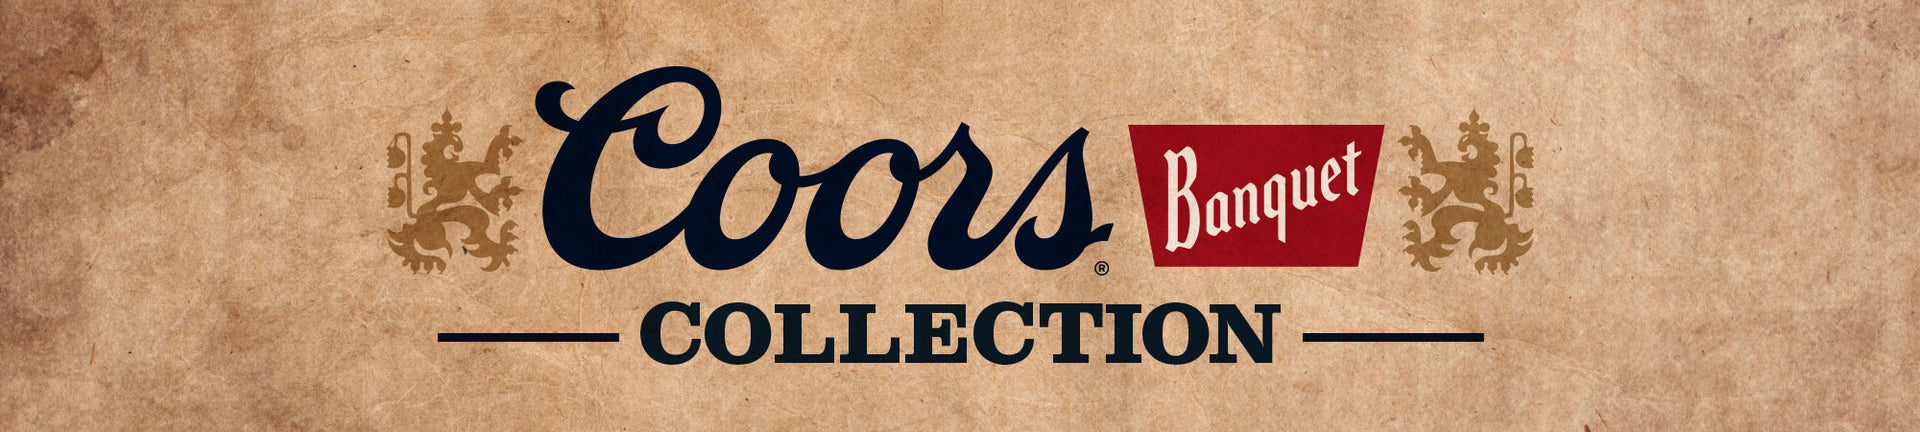 Coors Banquet Apparel Collection